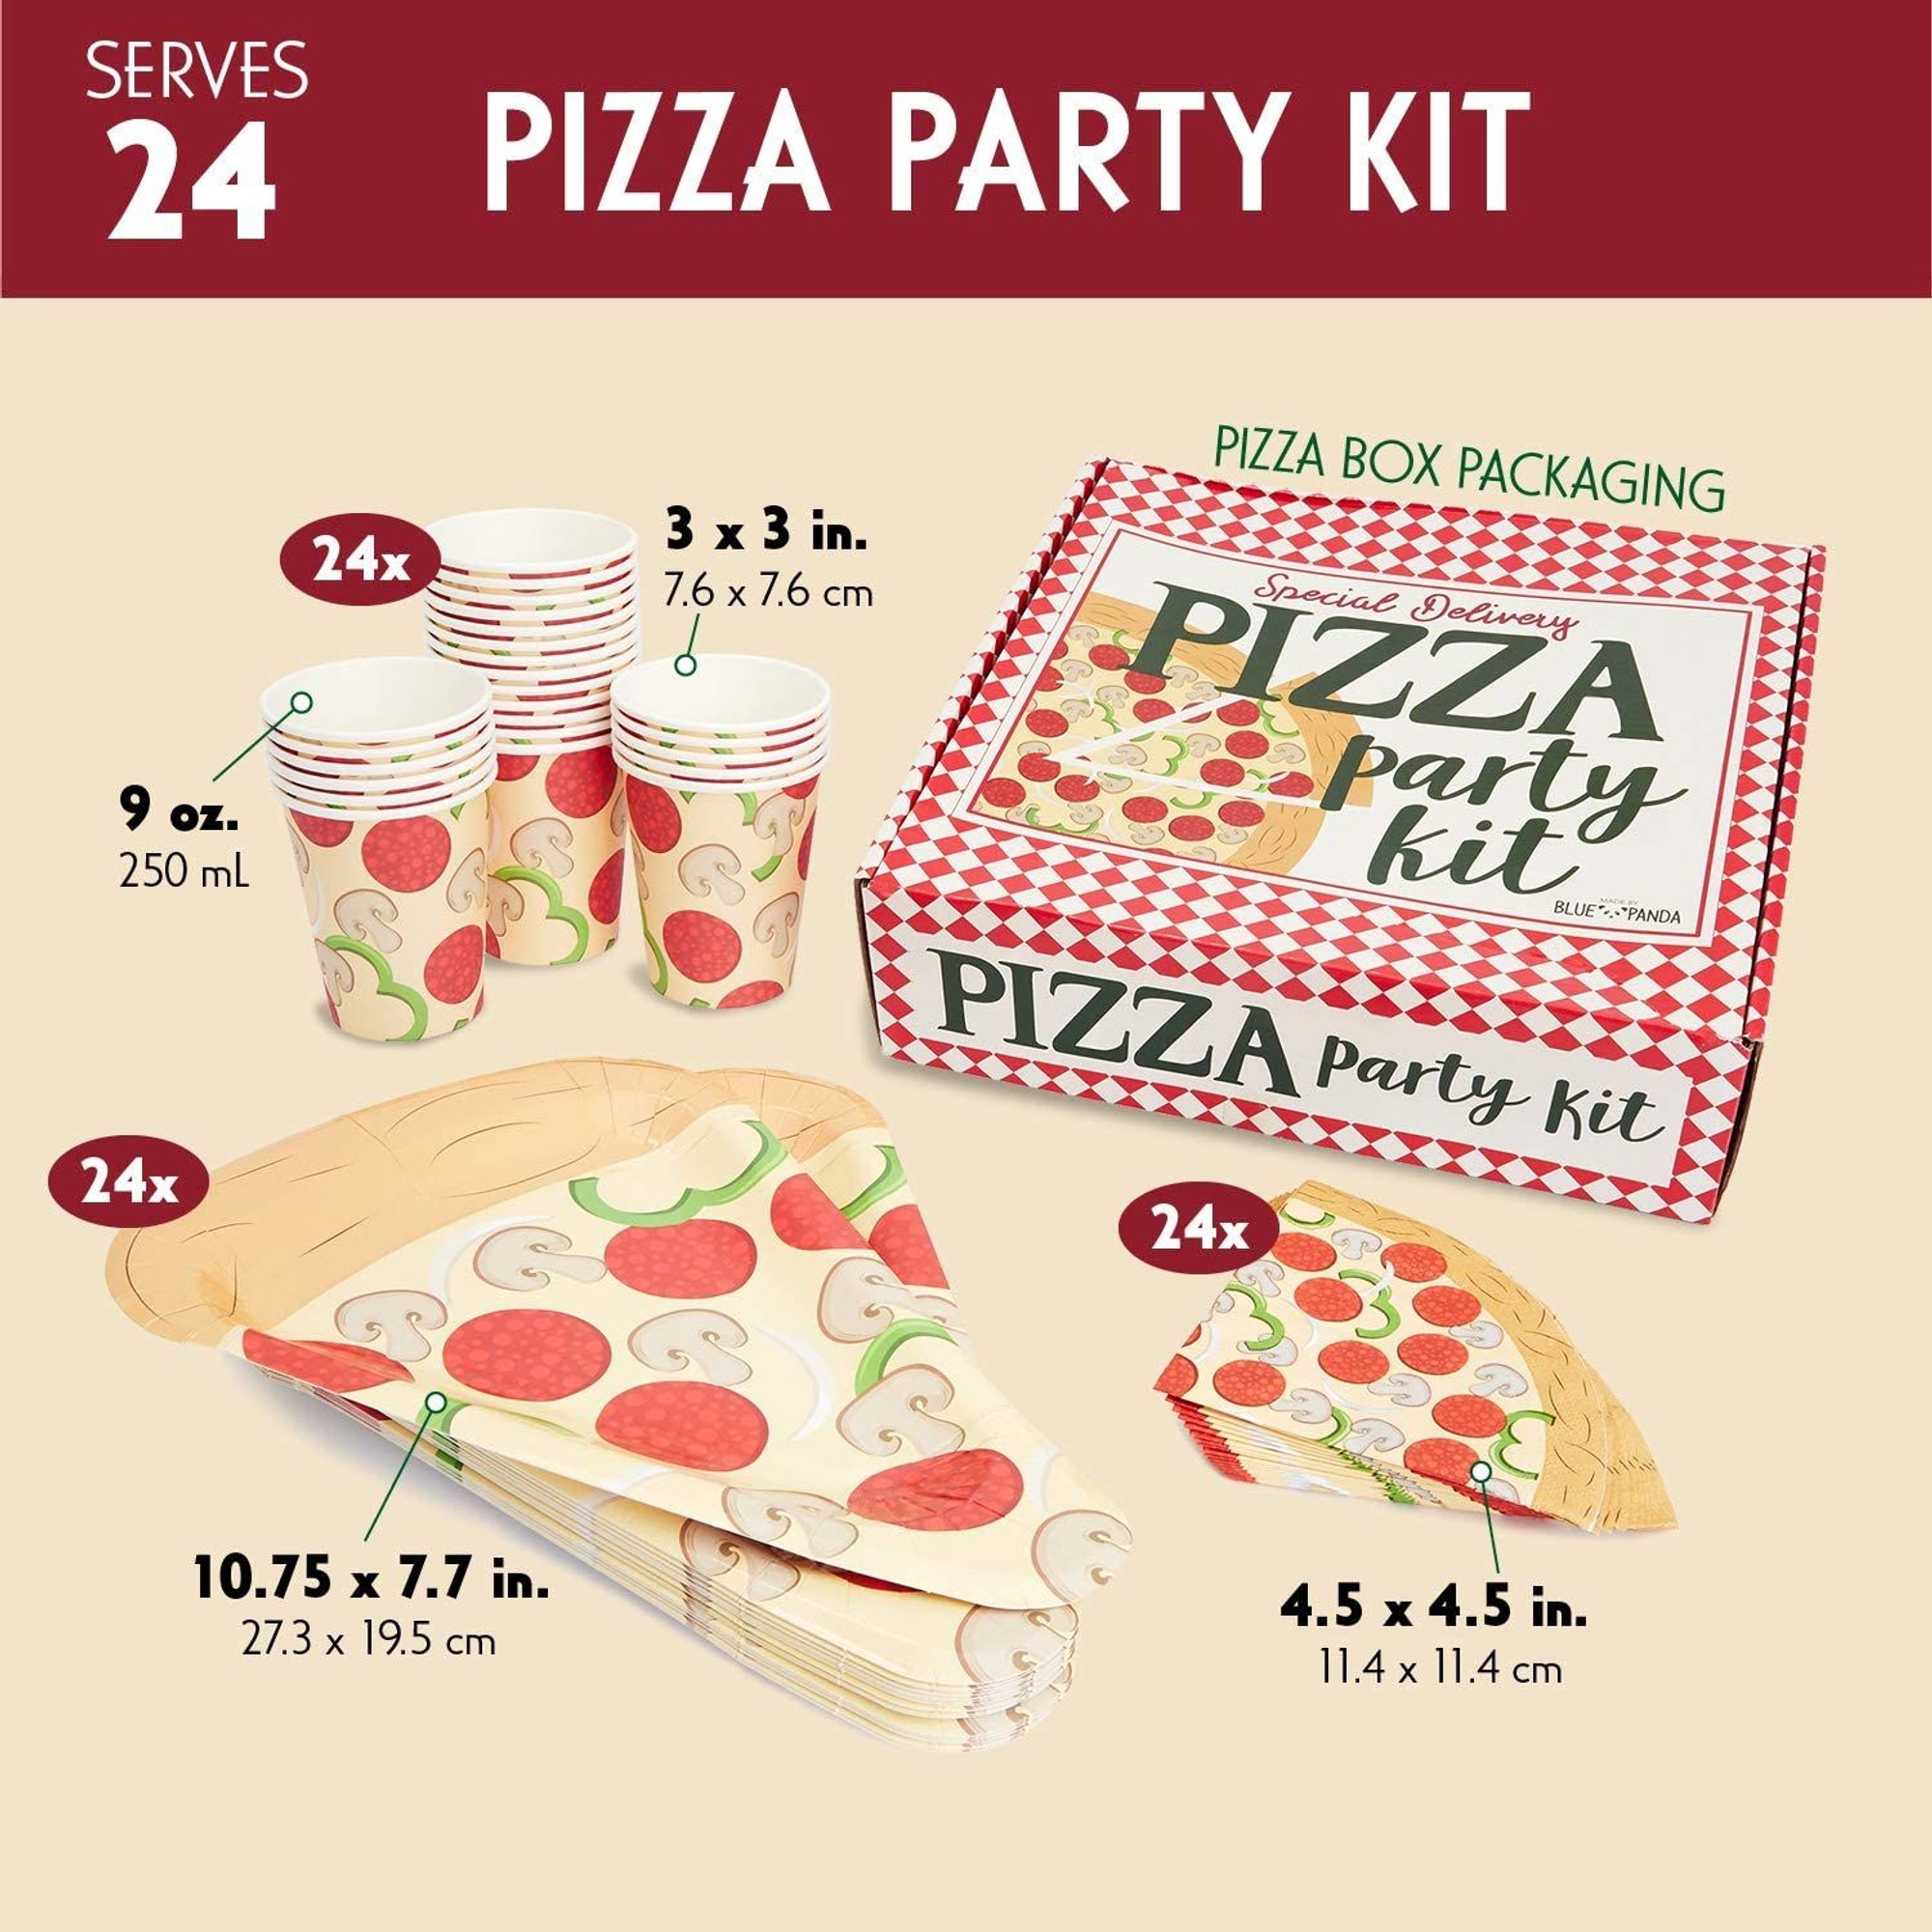 Pizza Party Supplies Kit, Includes Plates, Napkins and Cups (Serves 24 Guests) - image 2 of 8